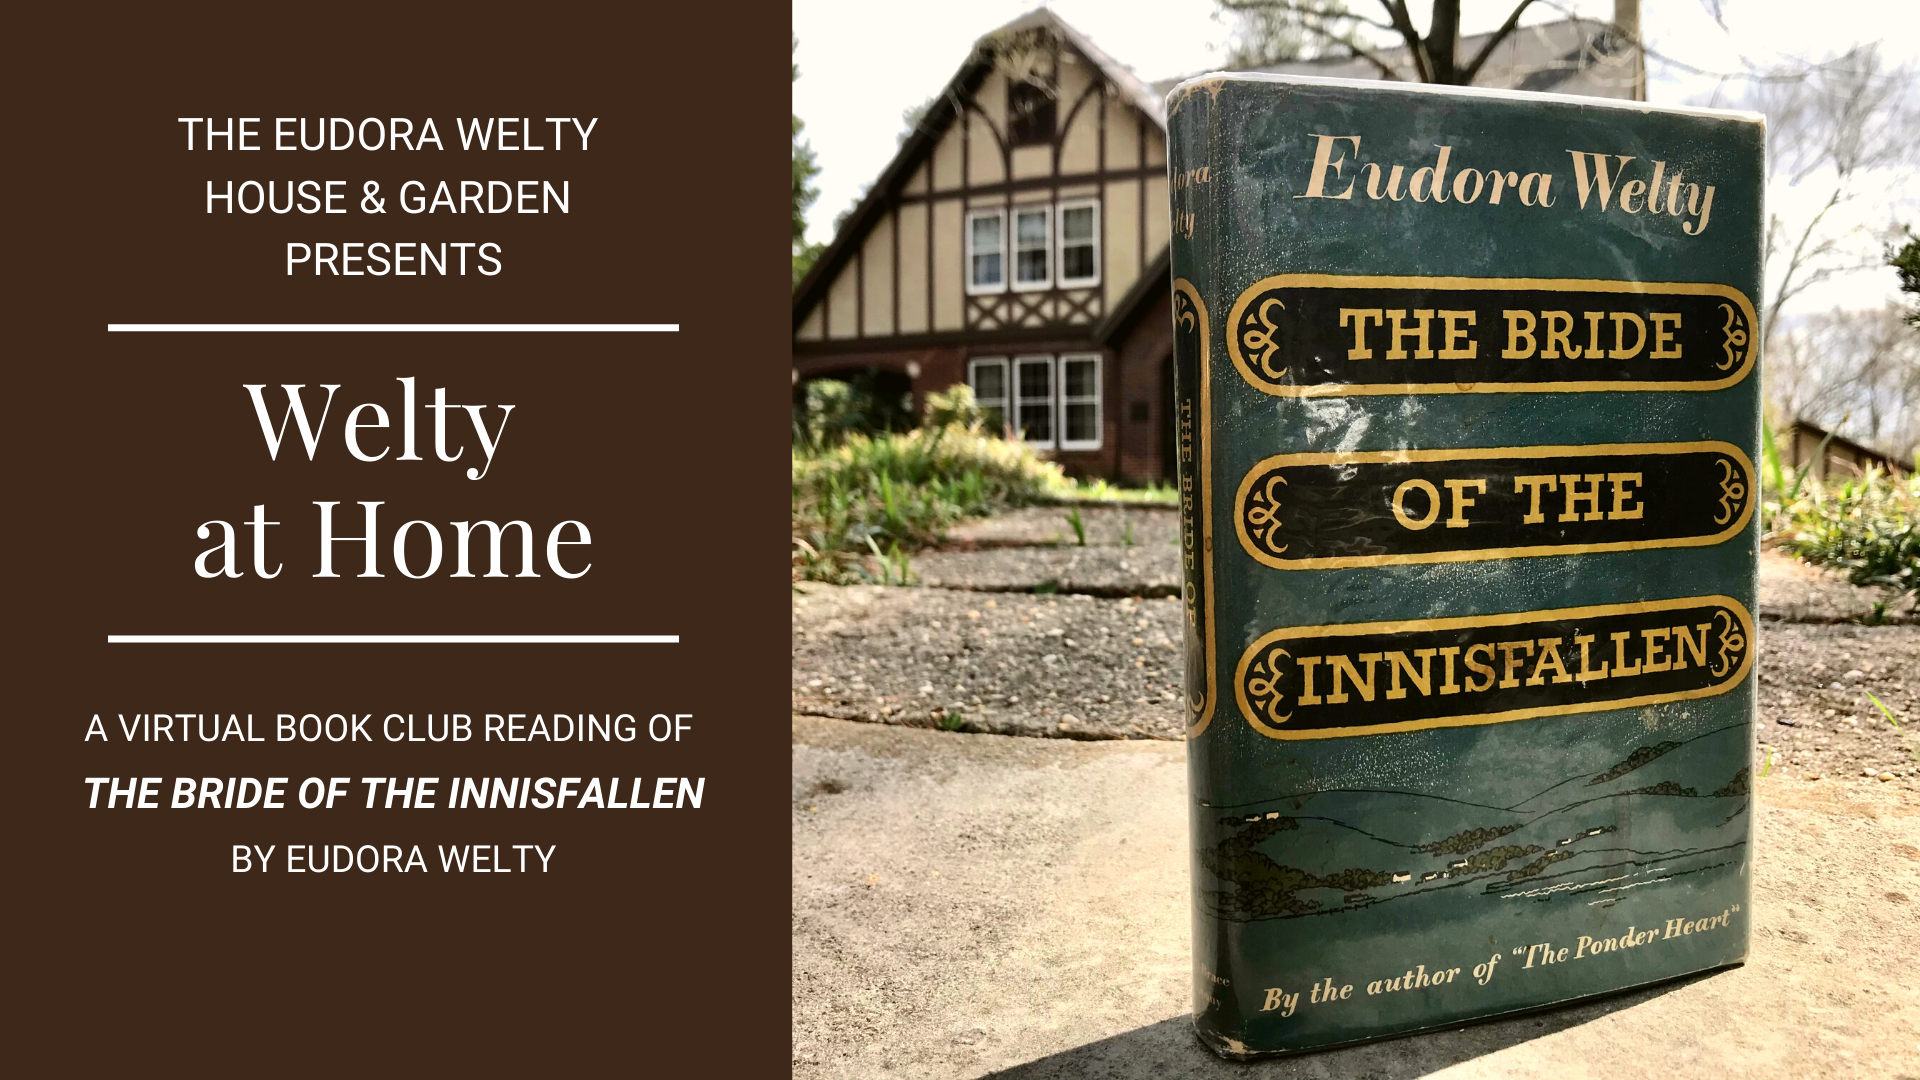 Our Welty at Home Virtual Book Club pick is The Bride of the Innisfallen, by Eudora Welty